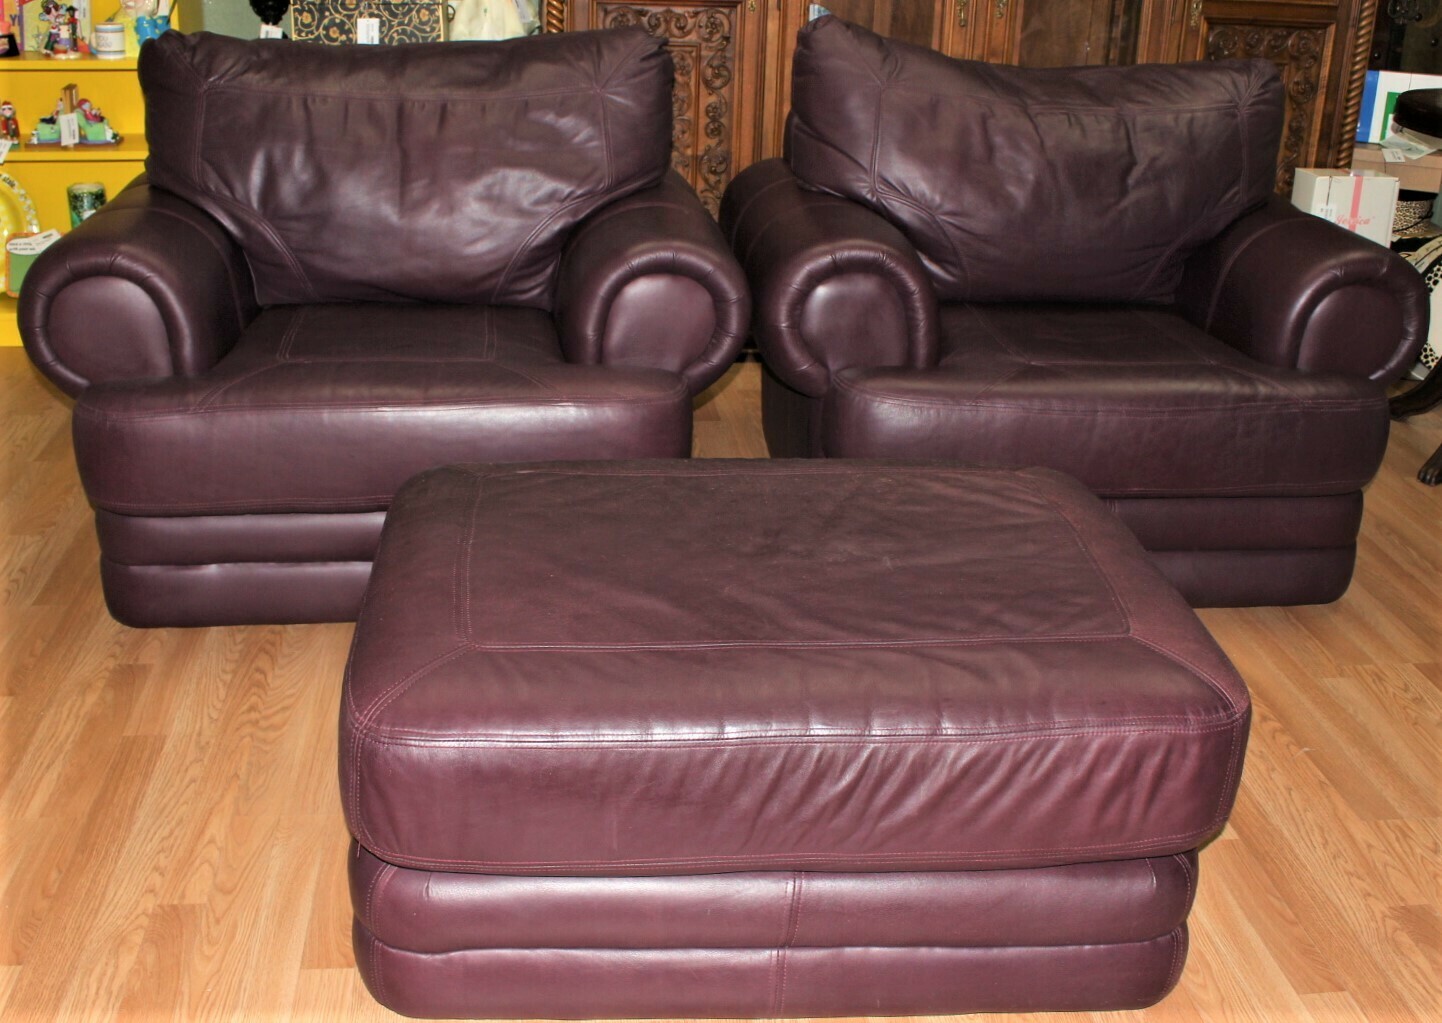 Pair of Custom Top Grain Leather Claret Red Oversized Club Chairs and Ottoman